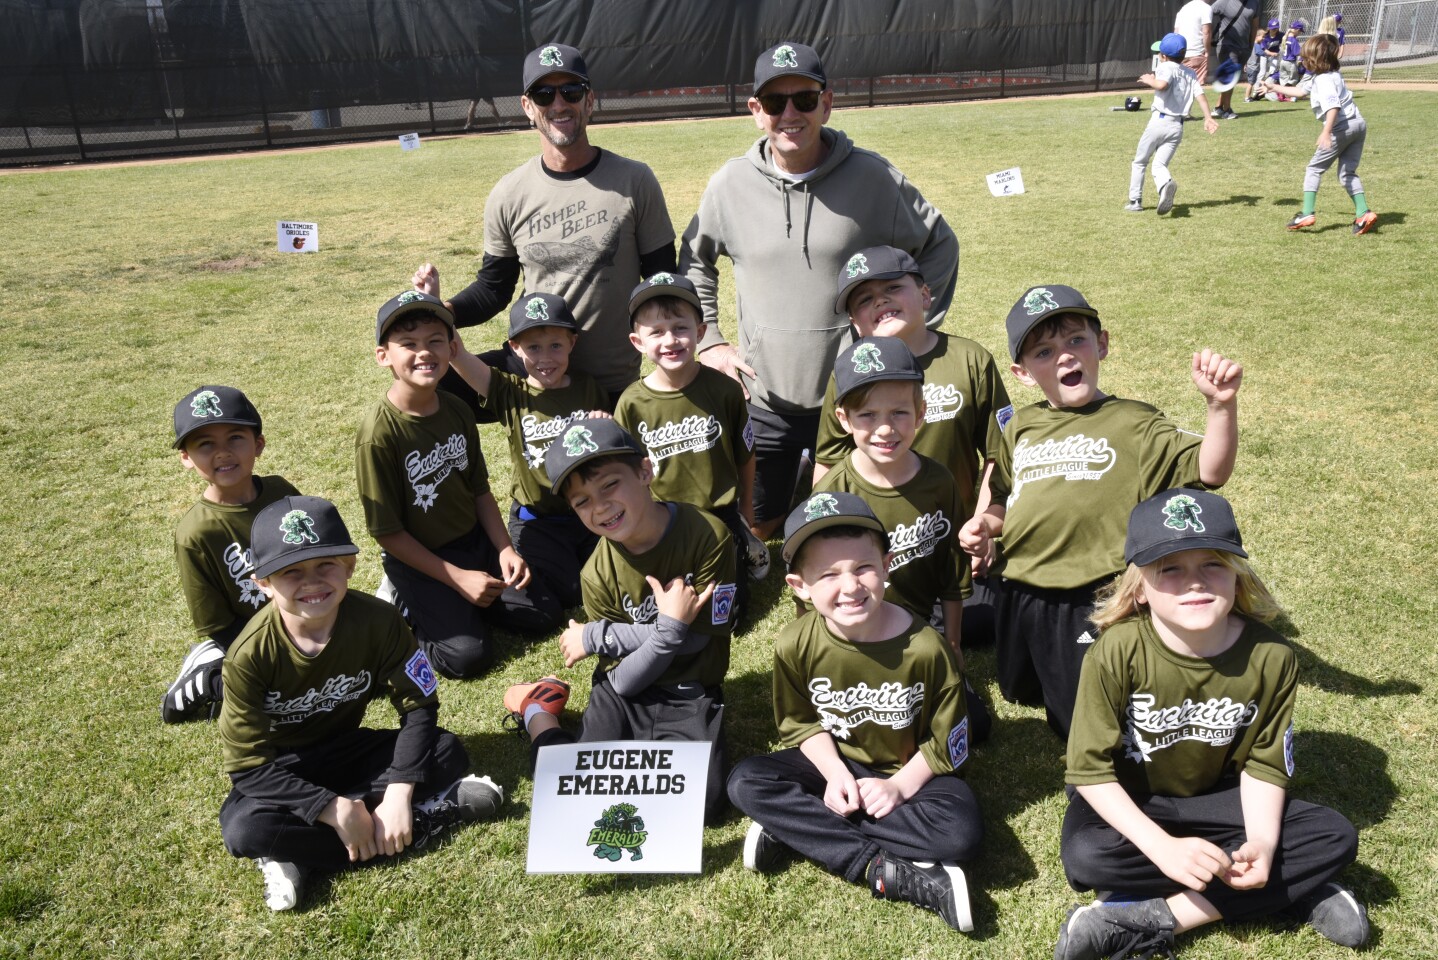 The Eugene Emeralds (Rookies), with coaches Jake Zuanich and Dave Waite